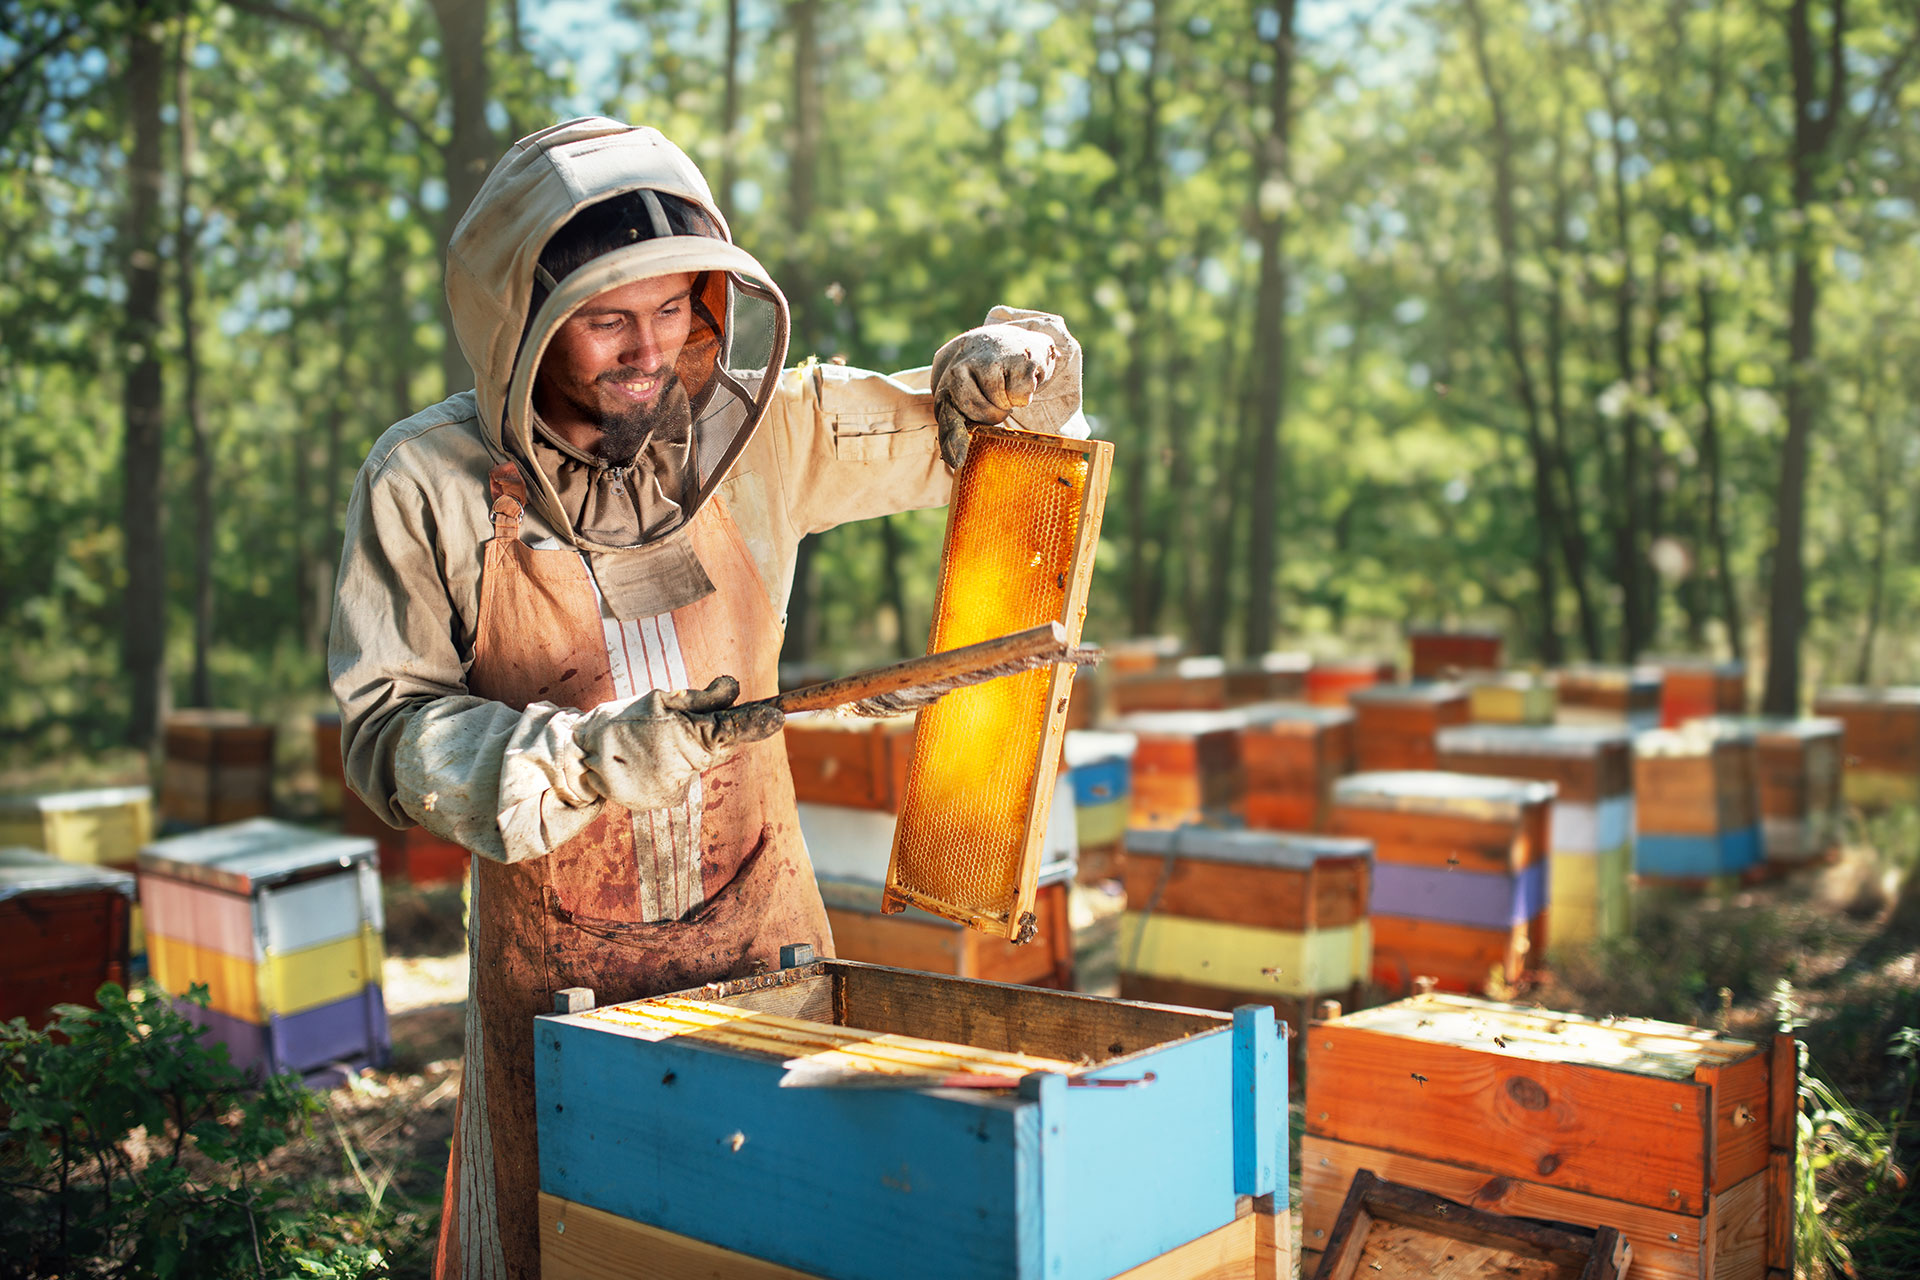 the beekeeper uses a bee brush the process of har 2022 01 18 23 45 28 E6HA8BP